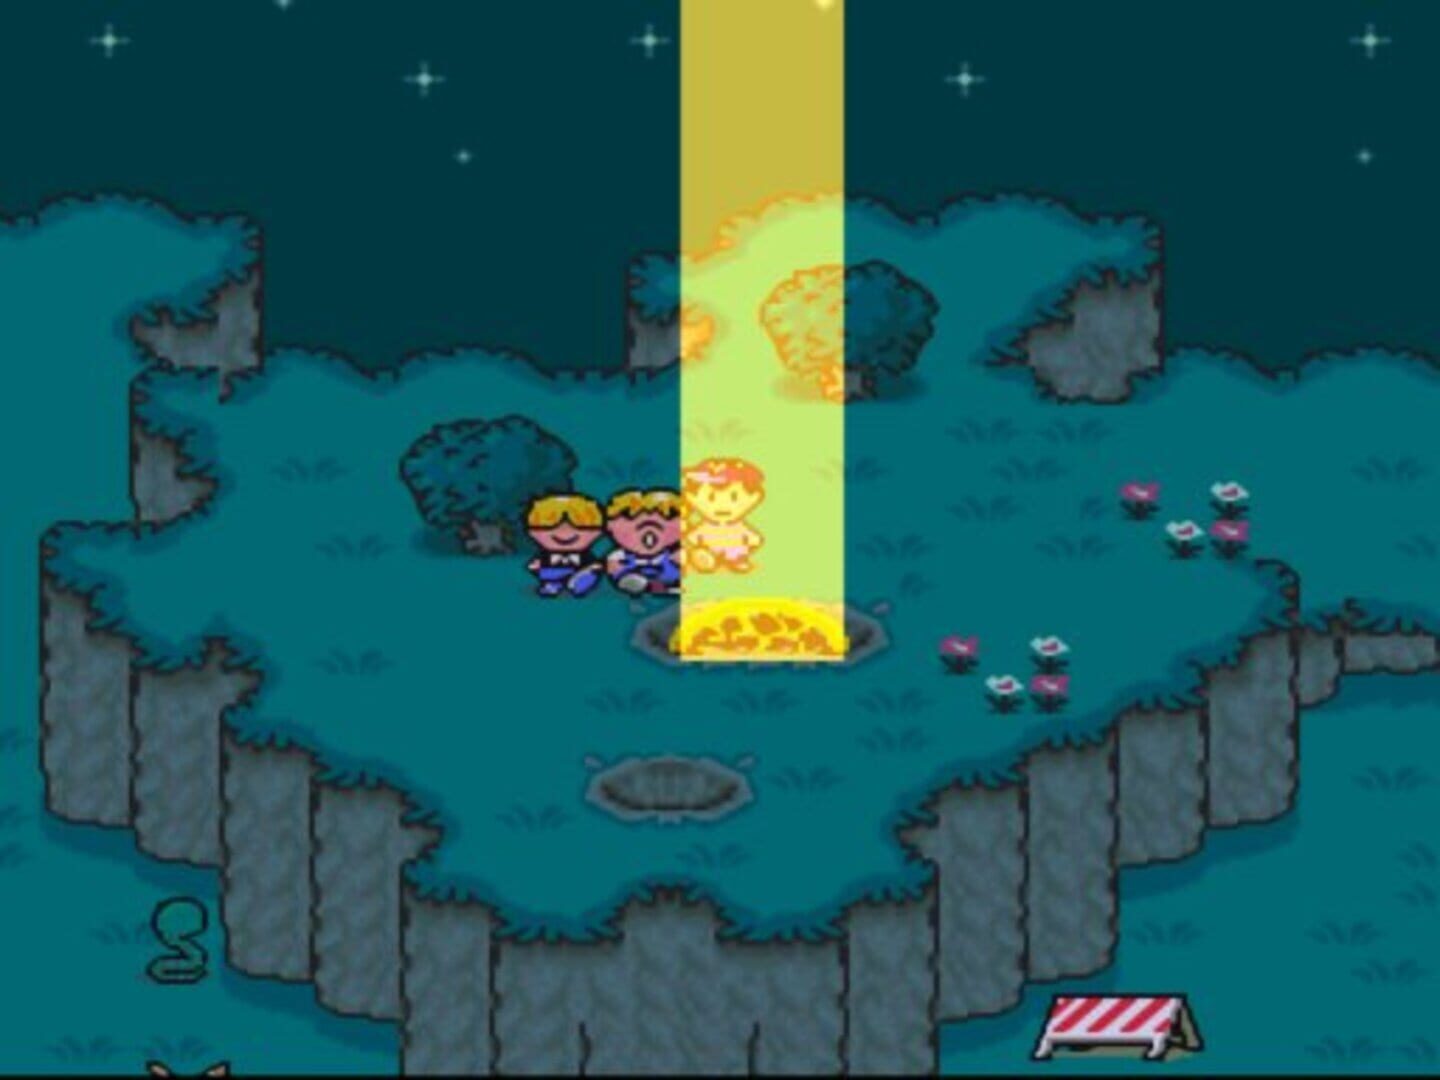 EarthBound Image